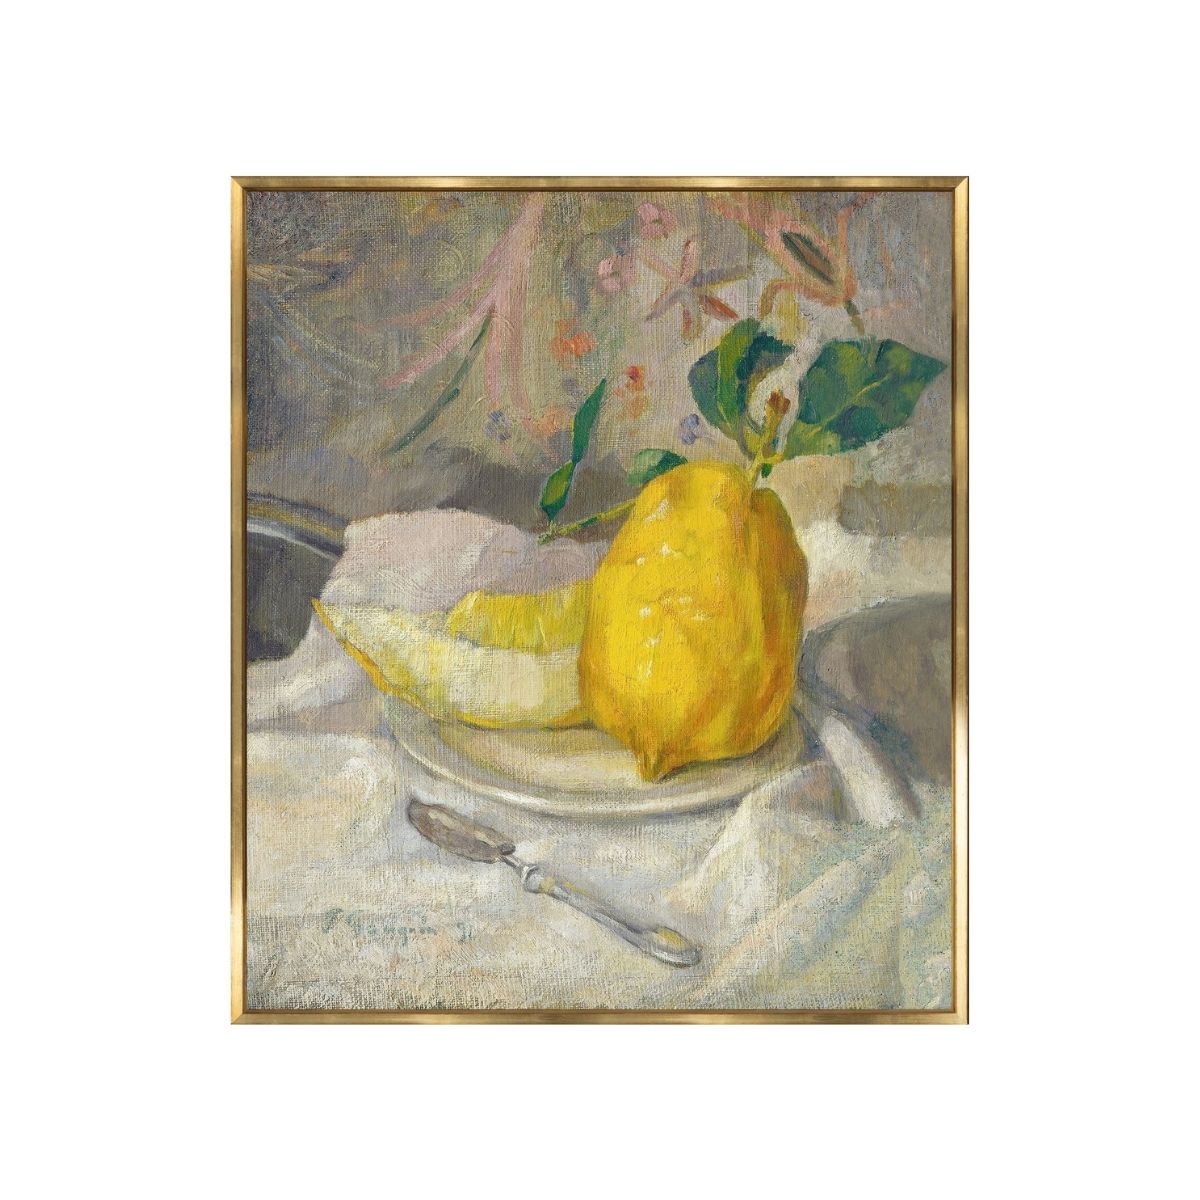 Melon and Lemon centred on a white tablecloth. Artwork in a golden frame. Post-impressionist art style. Front view.